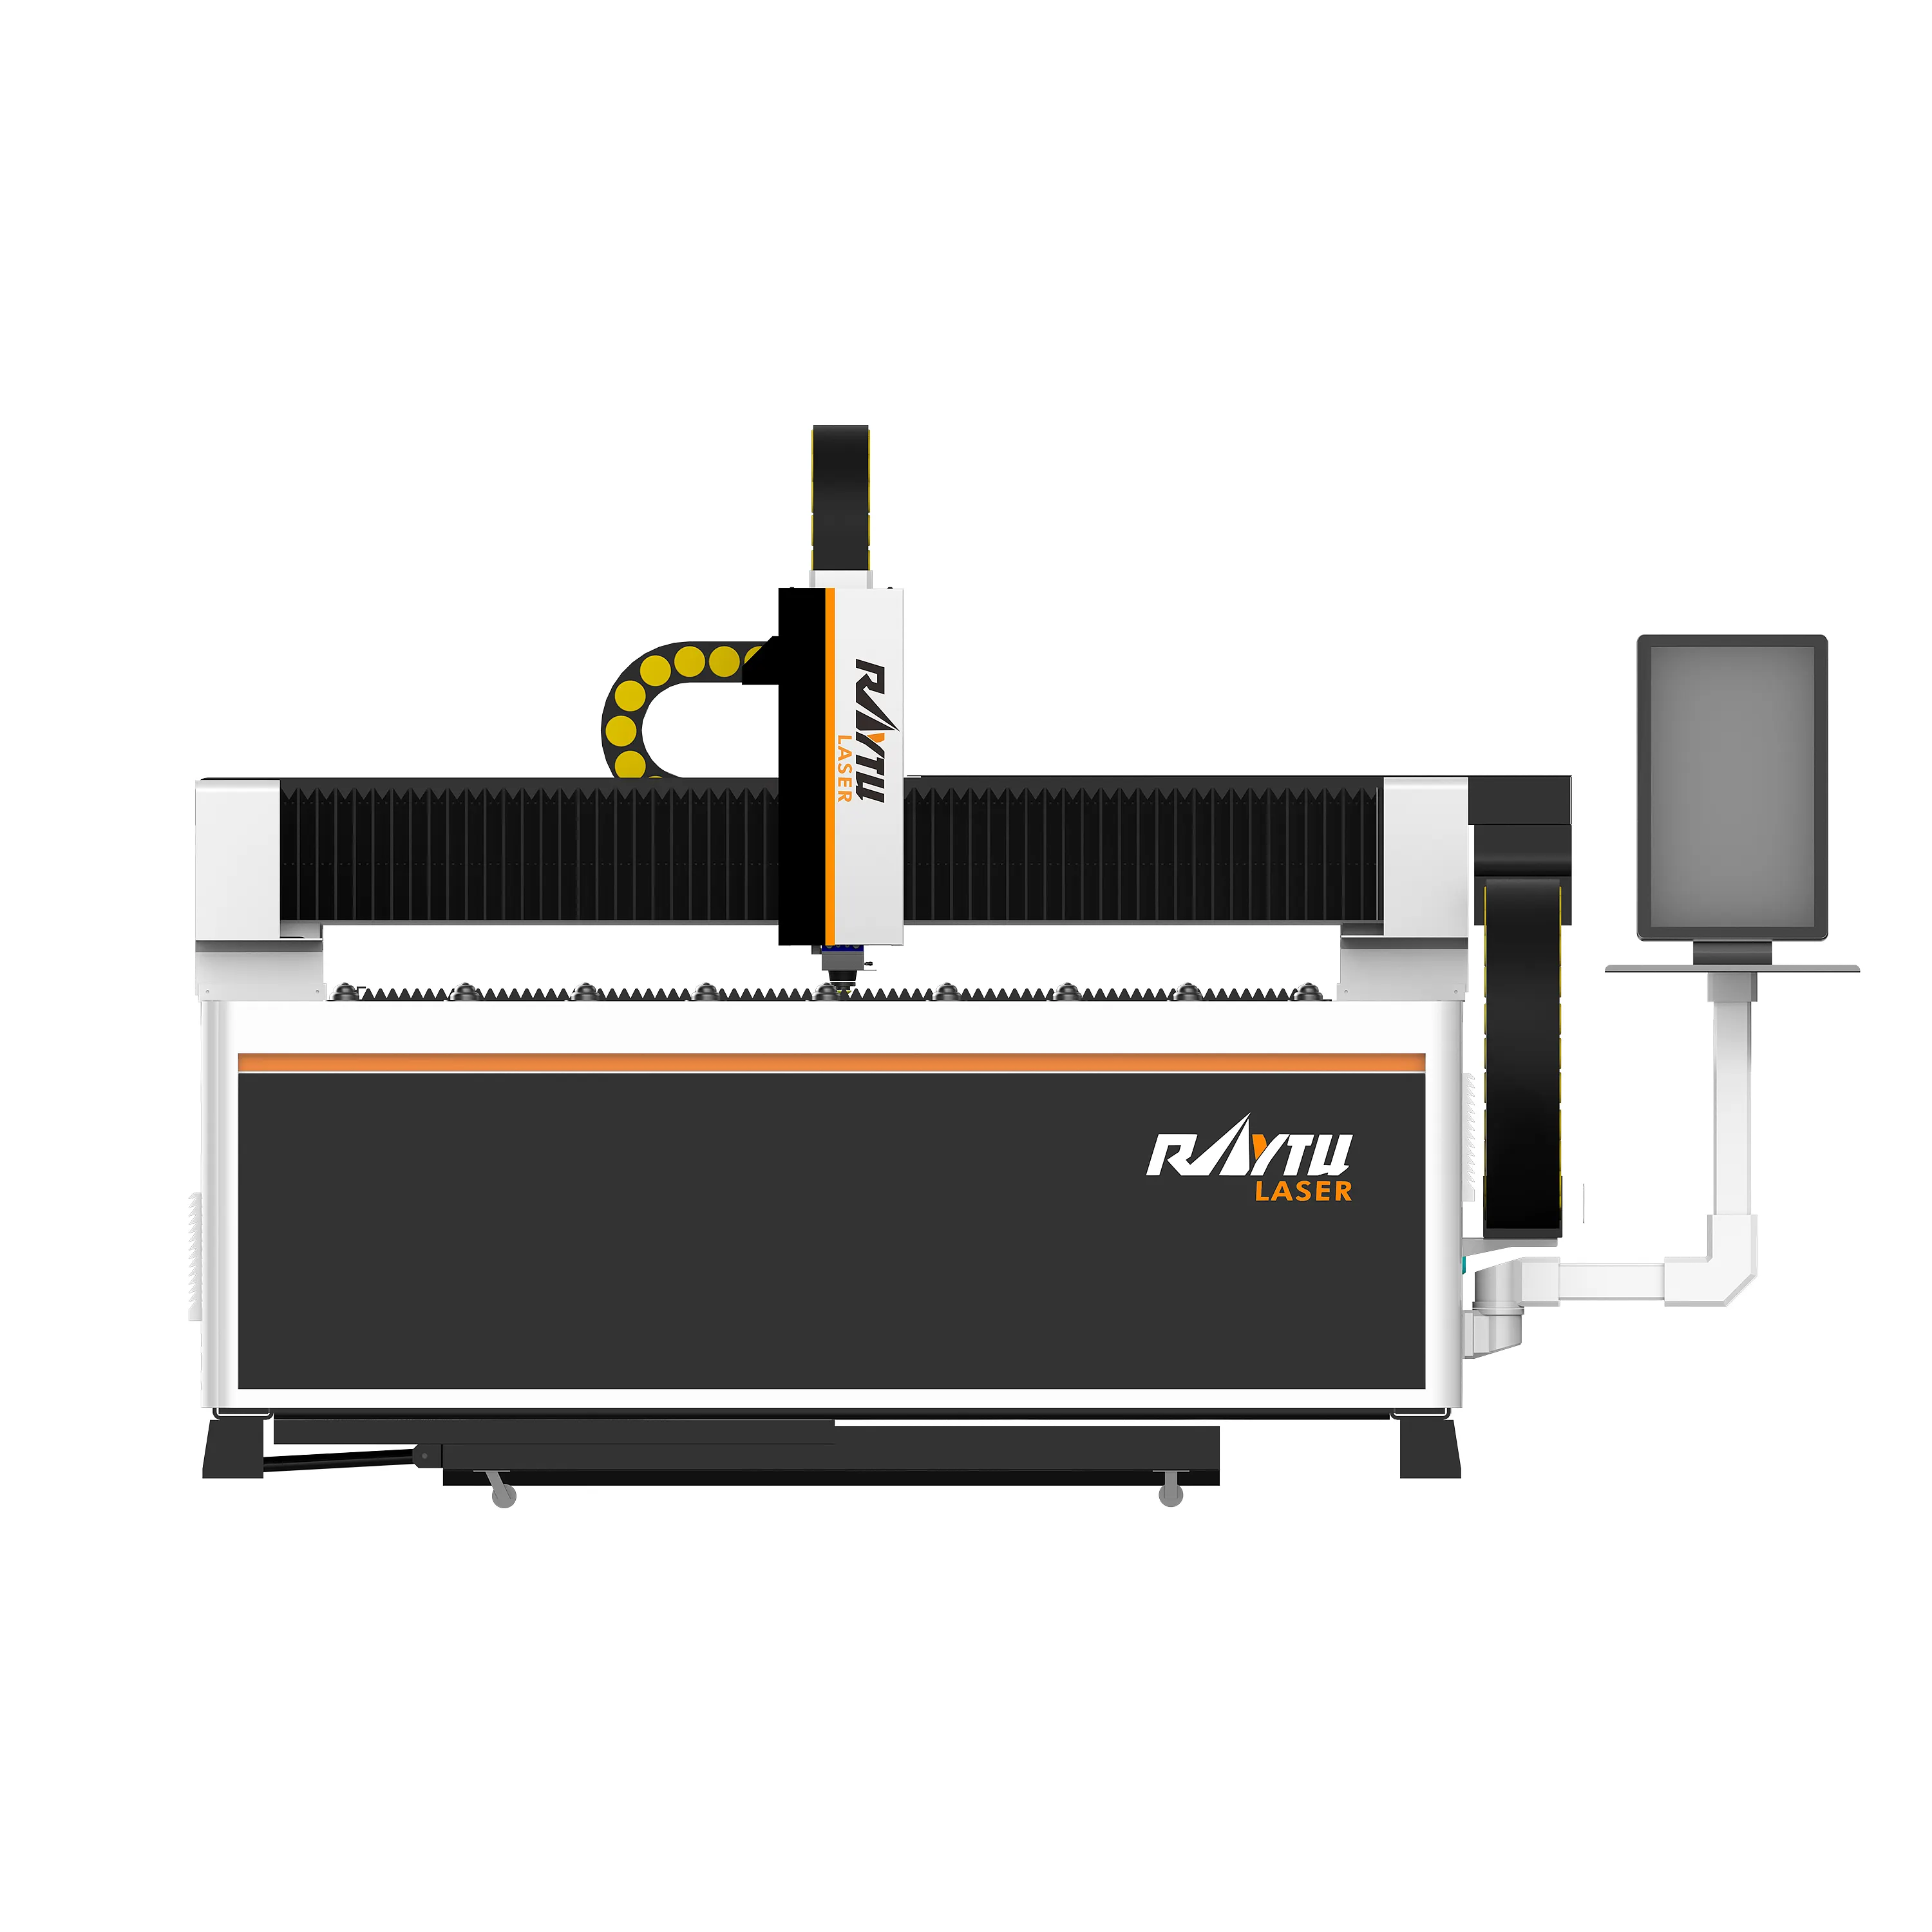 Raytu a series metal laser cutter, abordable